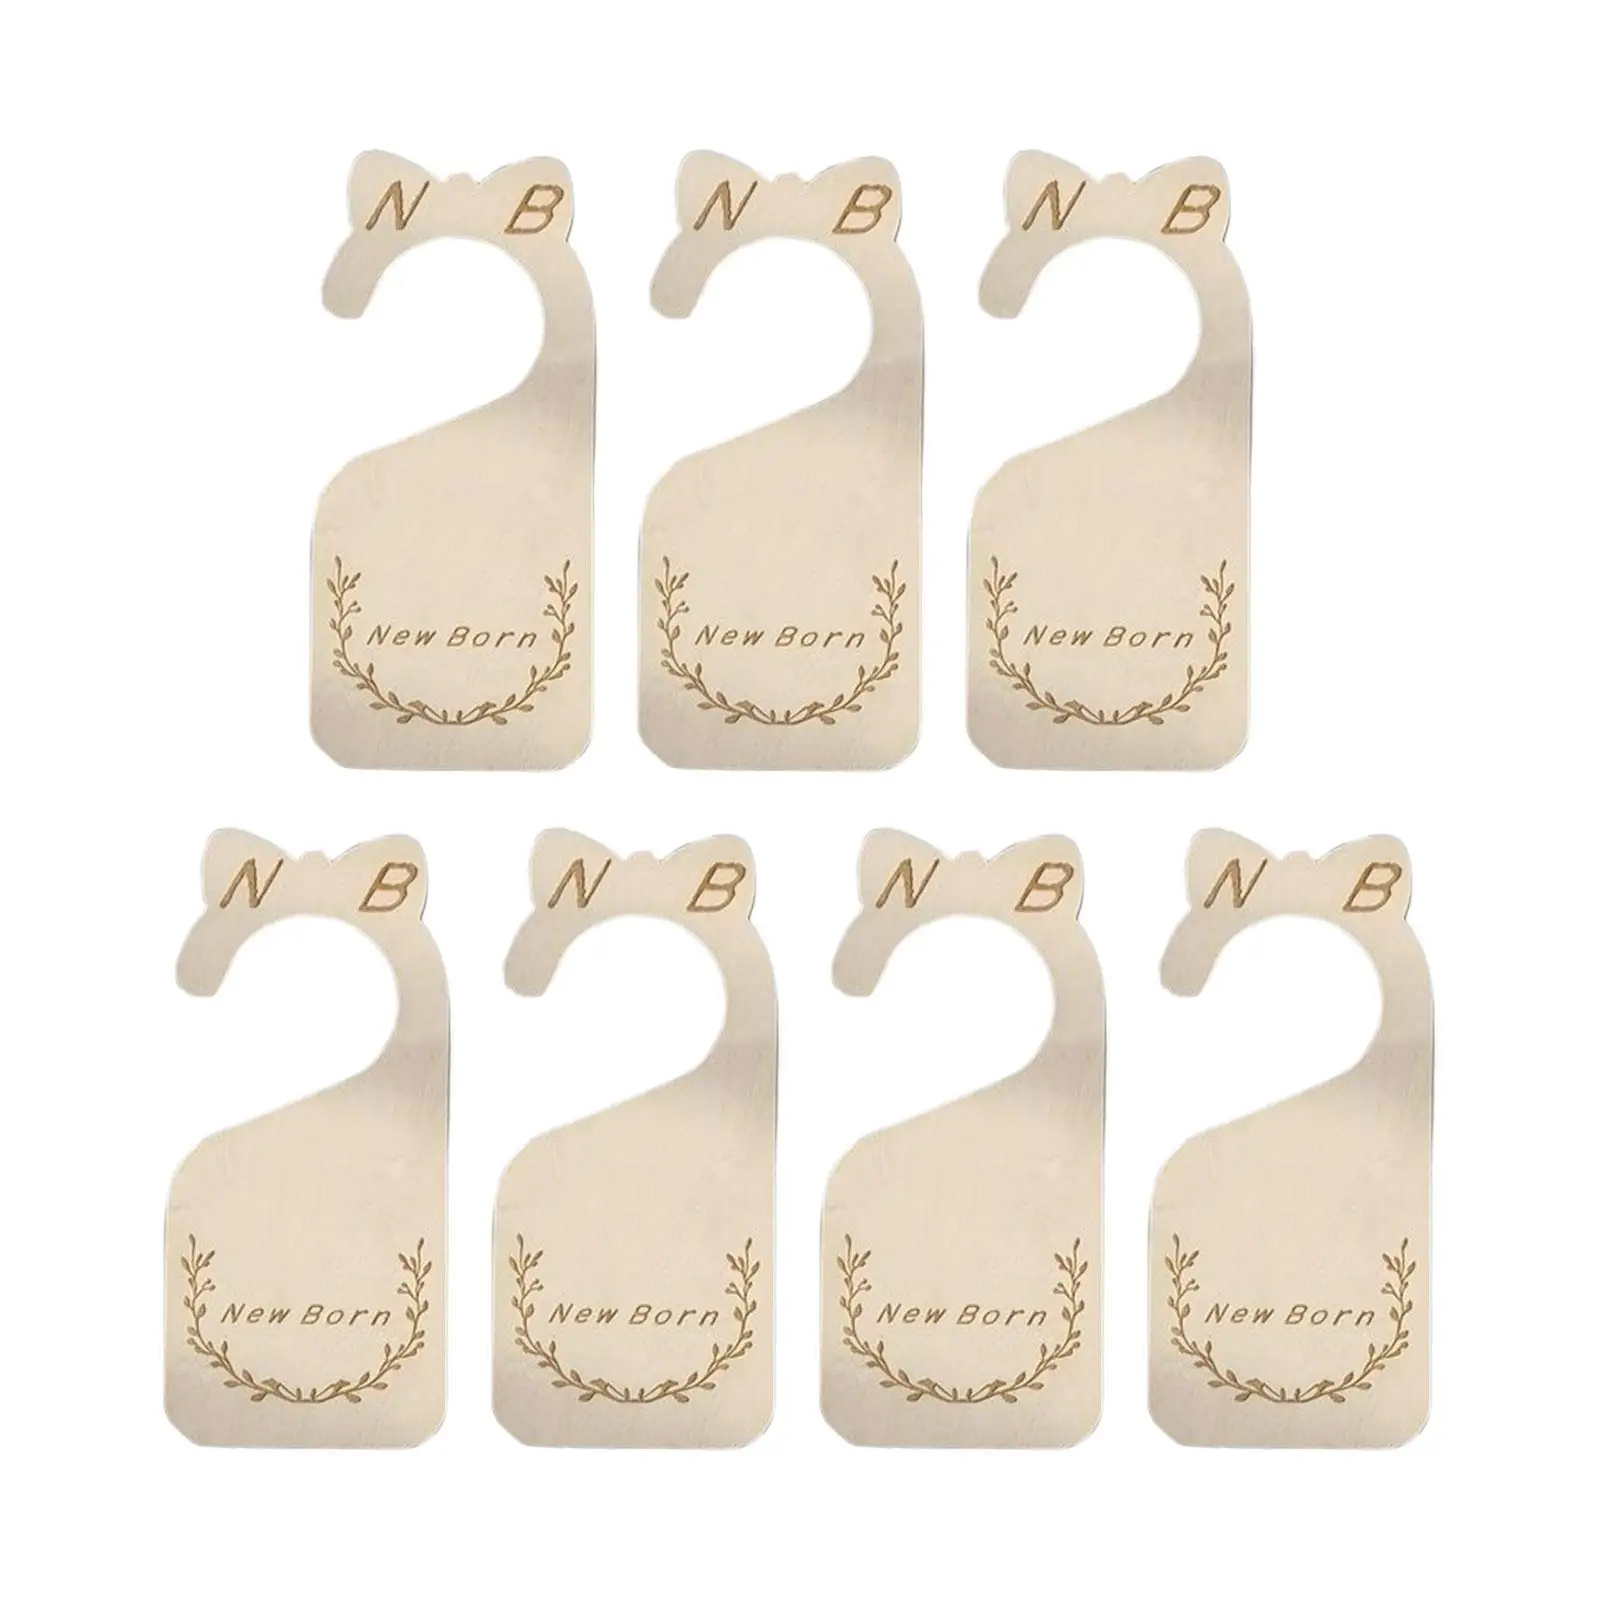 7Pcs Baby Closet Size Divider, Wooden Seperators Carving Adorable Closet Organizer Tag, for Infant to 24 Months Gift Supplies